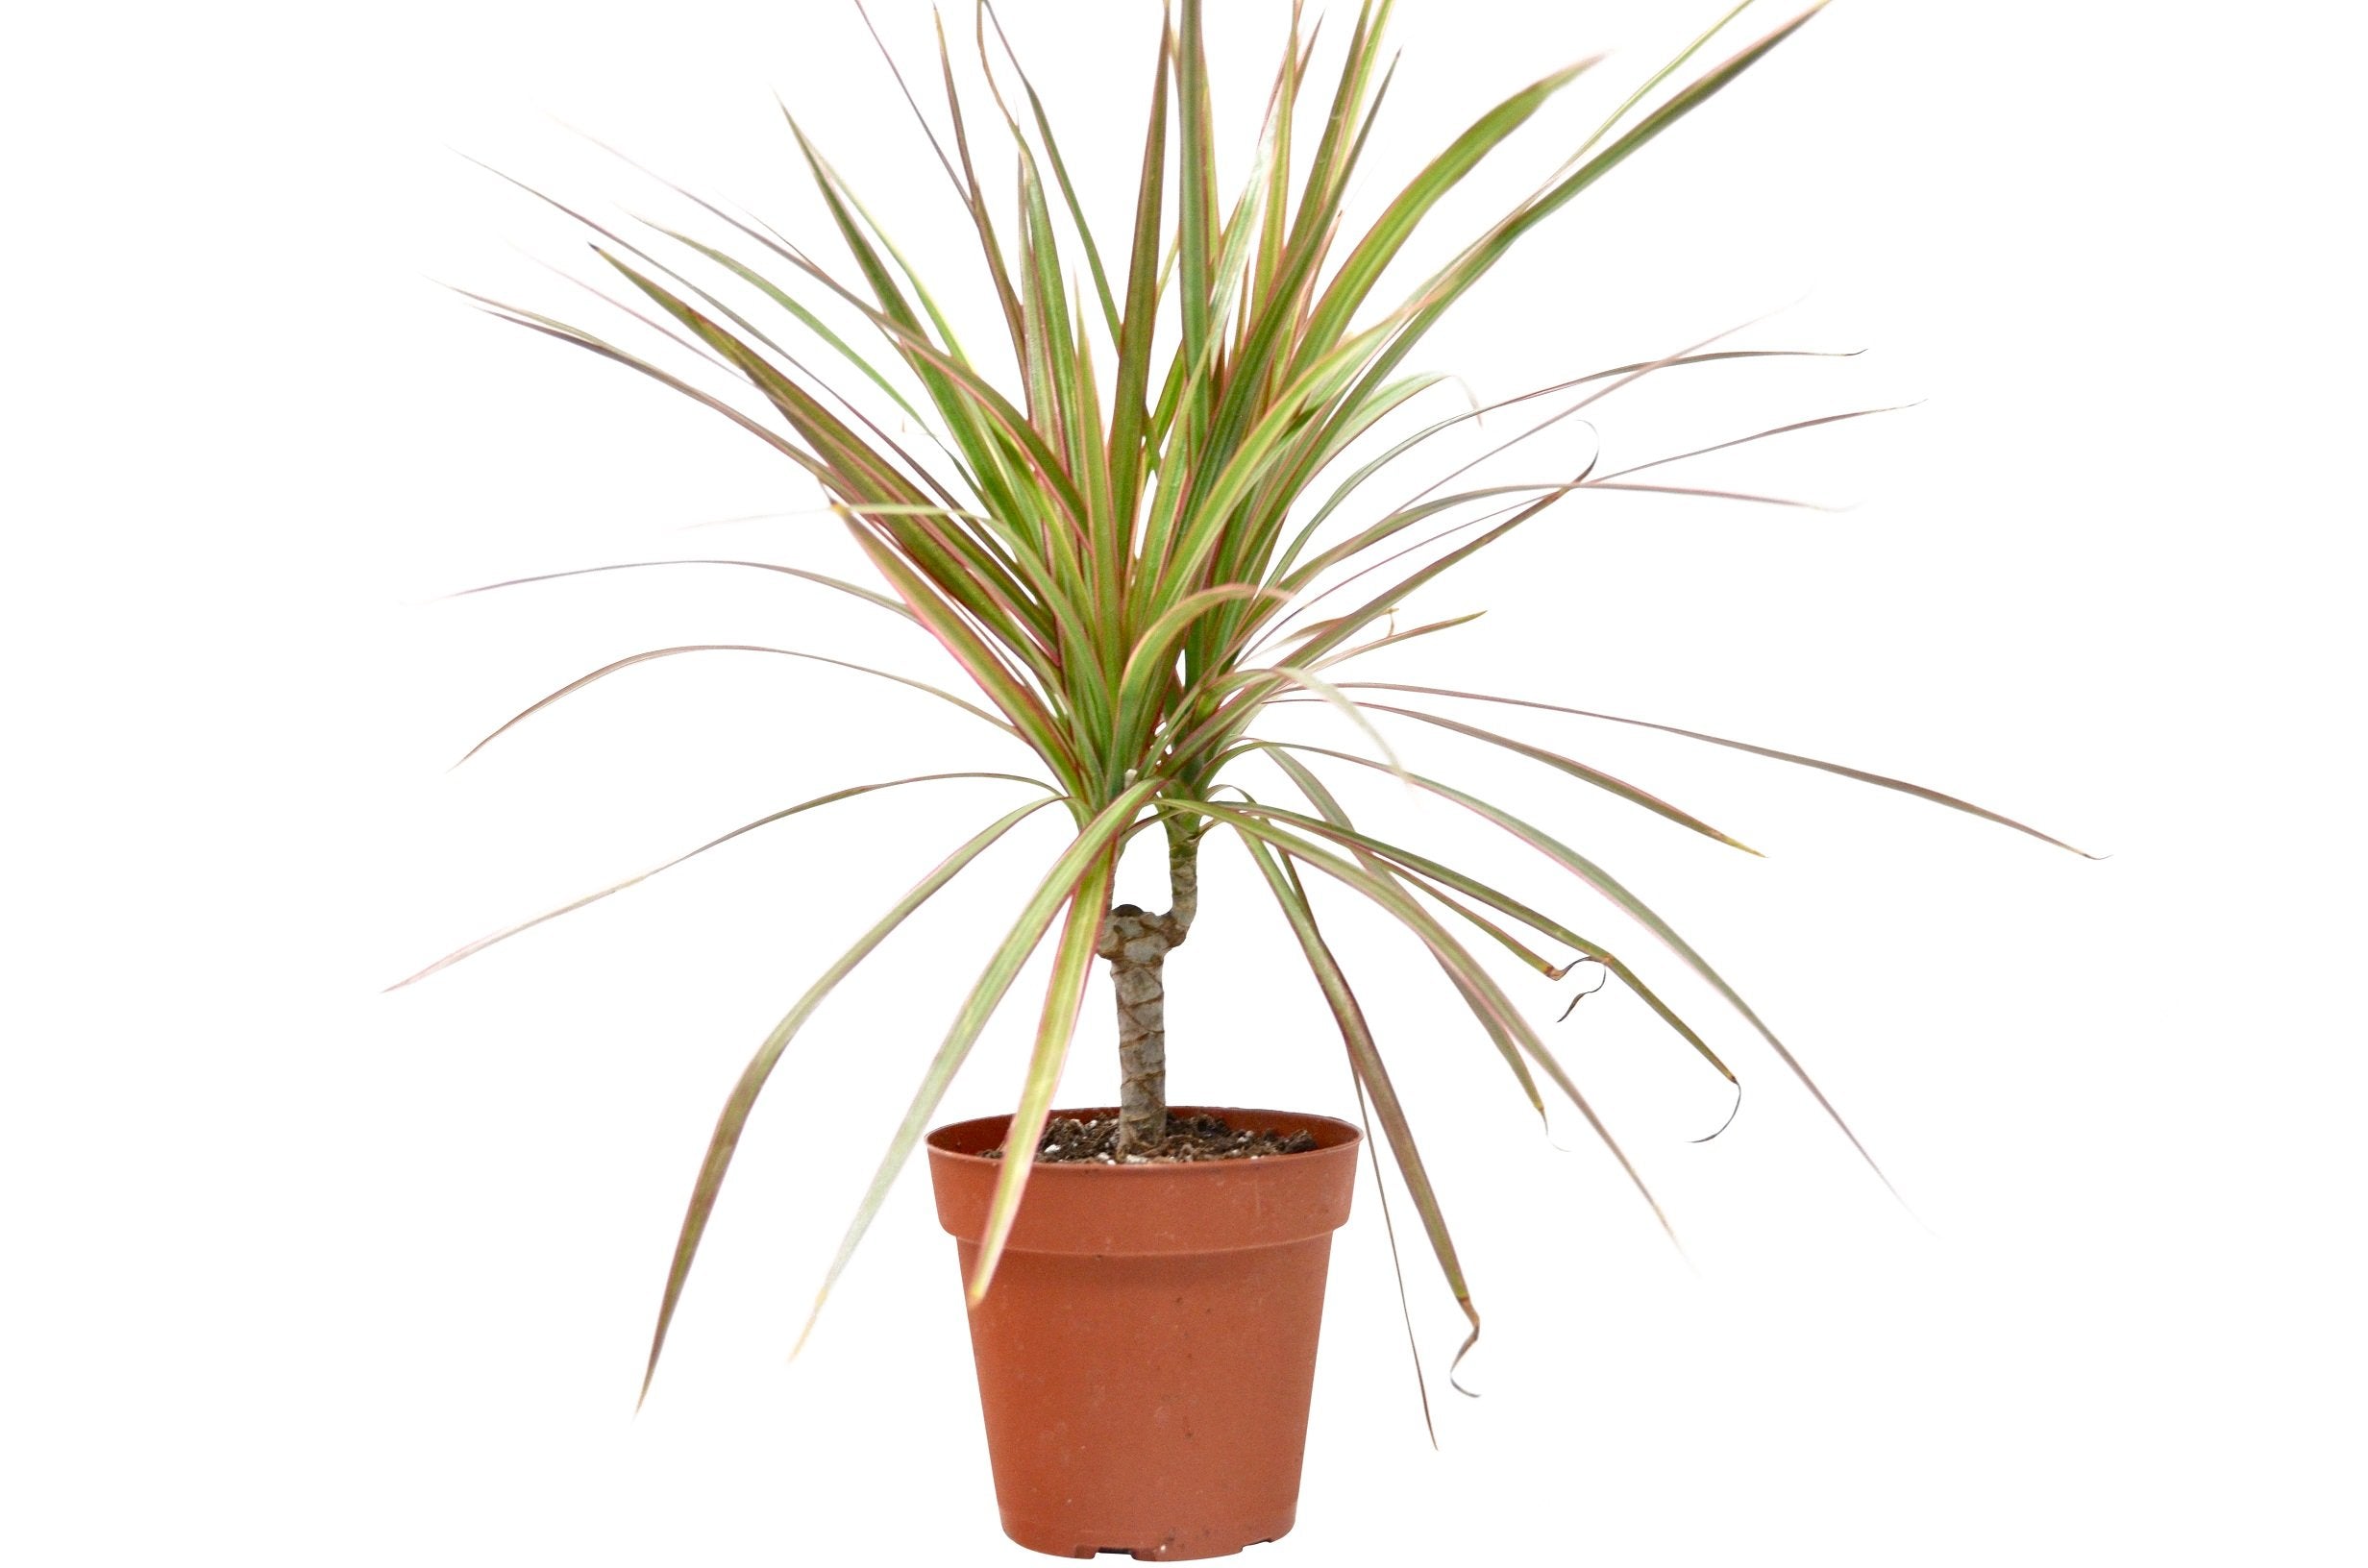 A plant in a pot on a white background from one of the best plant nurseries near me.